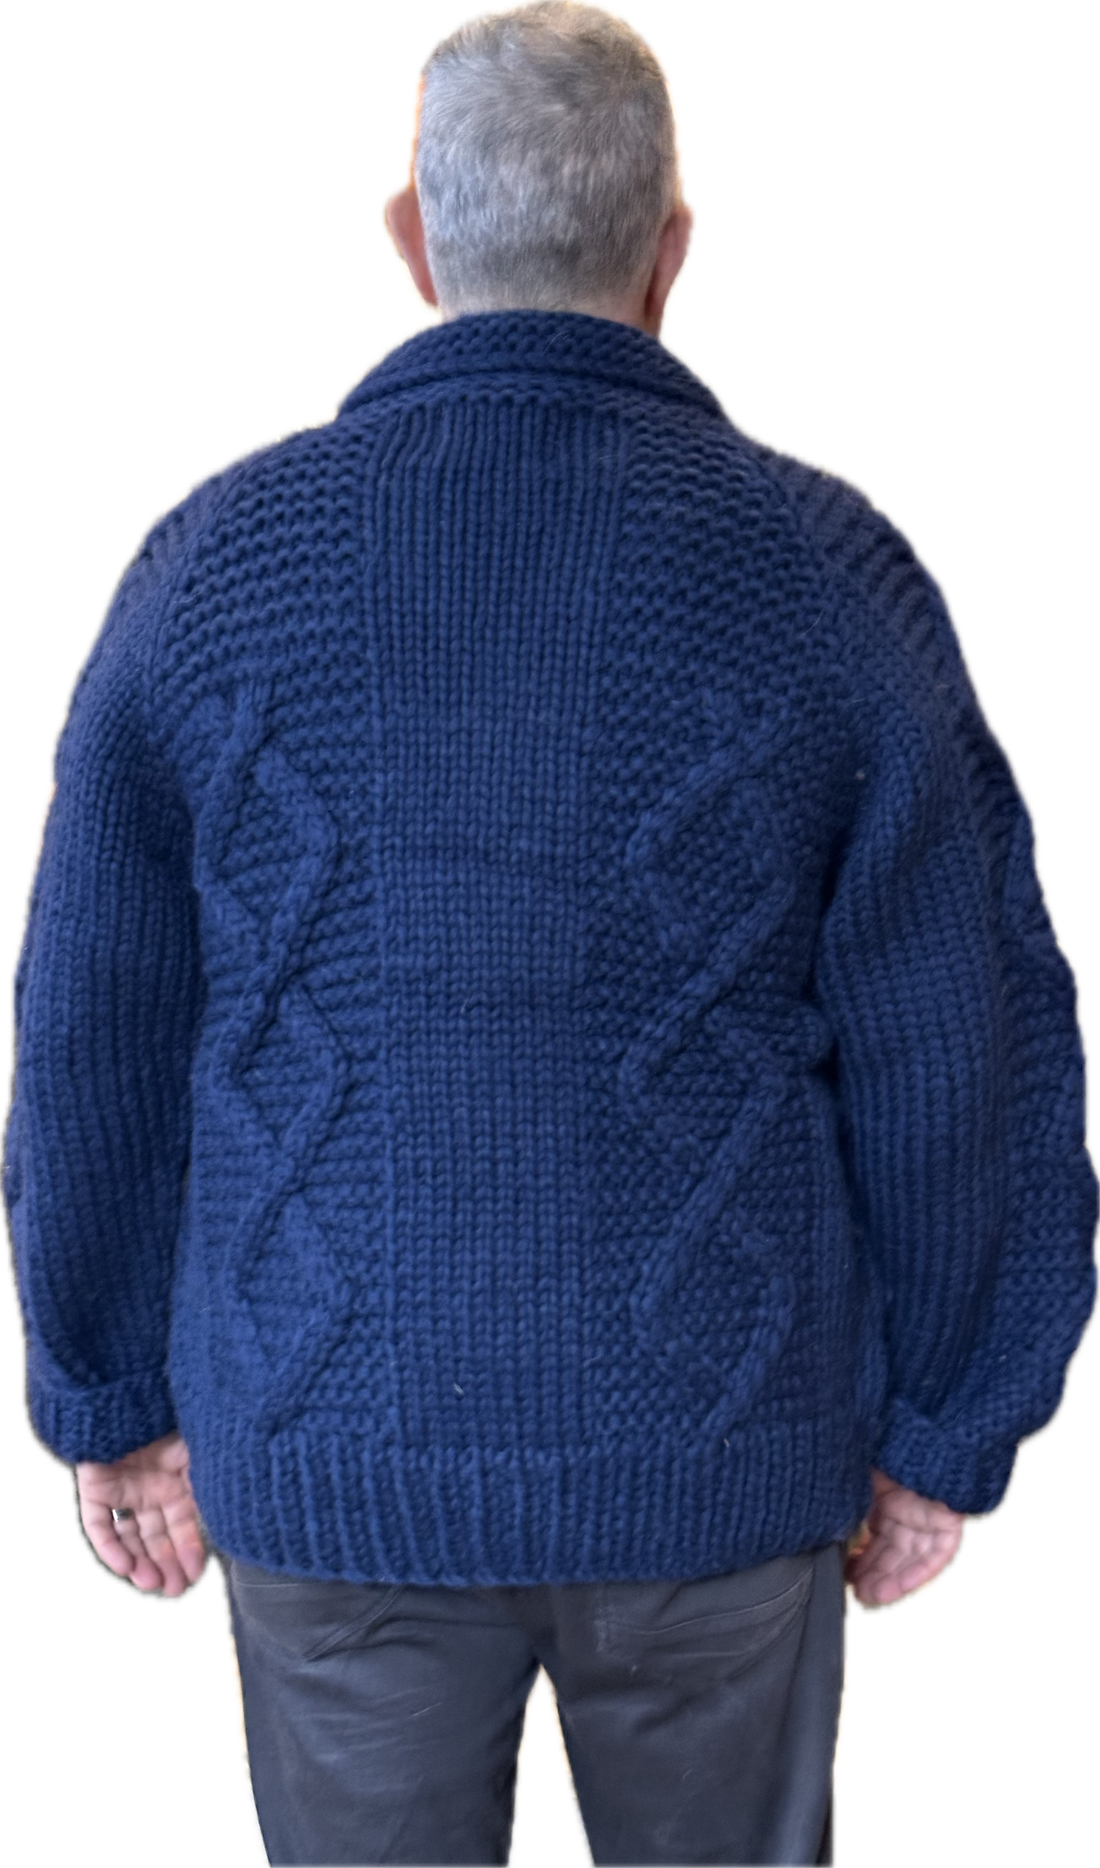 Canadian knit sweater